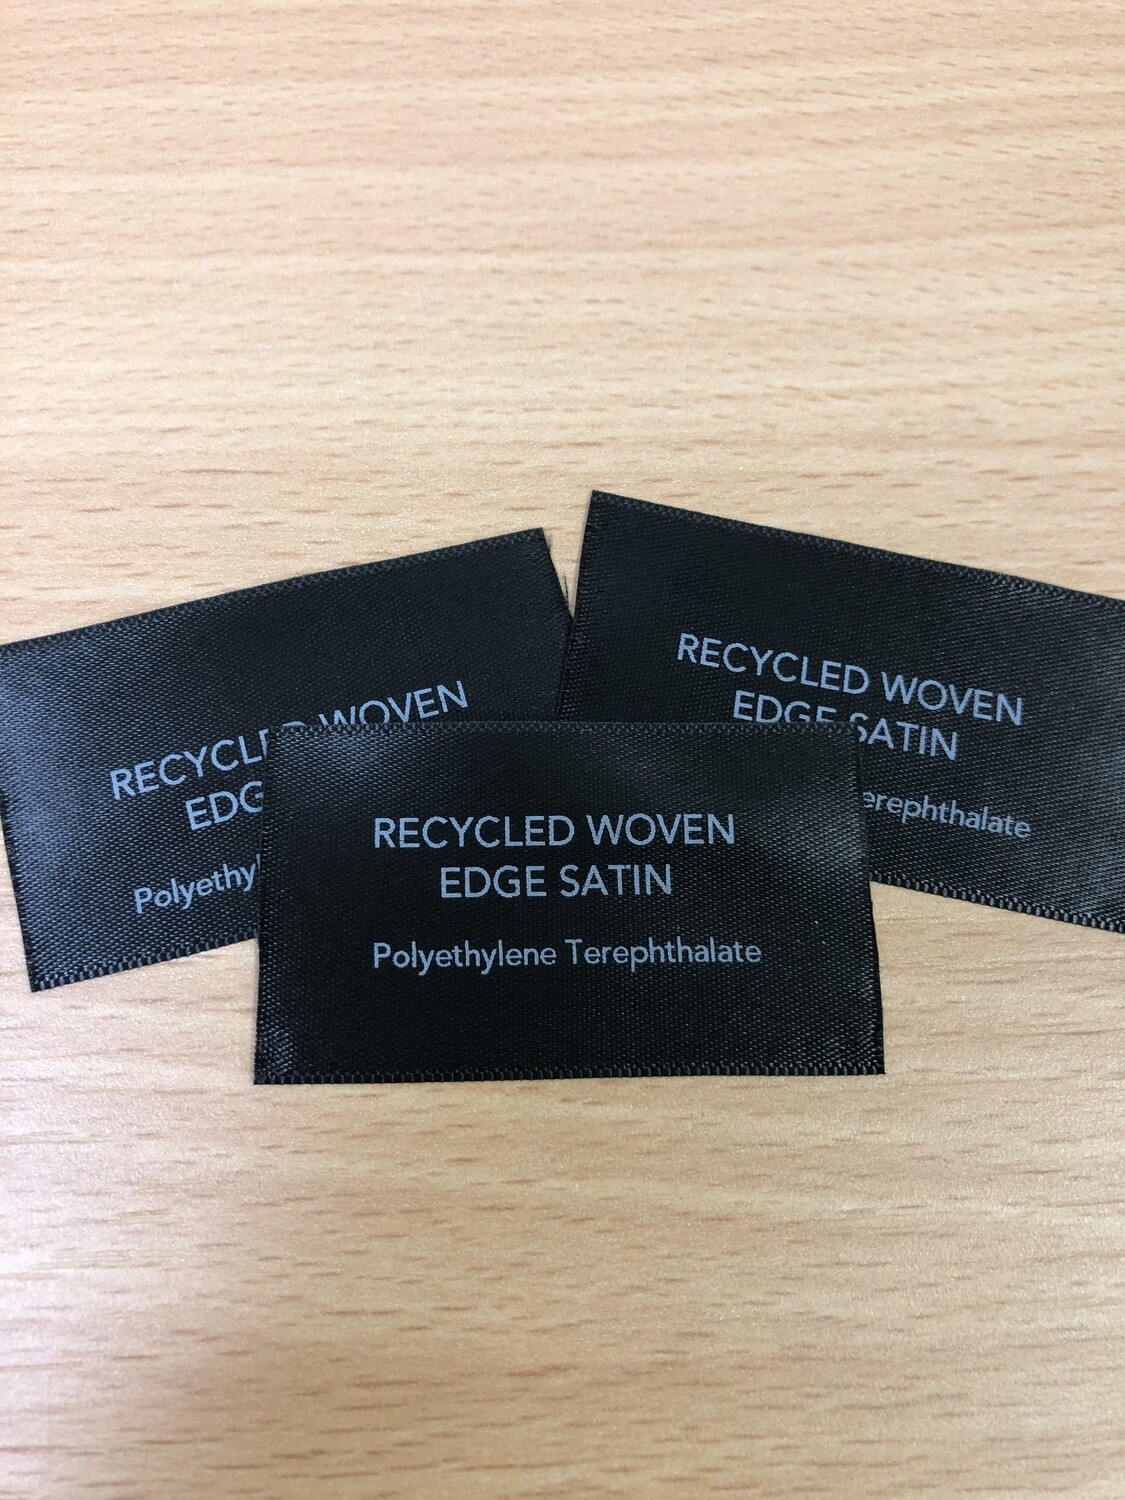 Recycled Woven Edge Satin PRINTED x 100 Labels